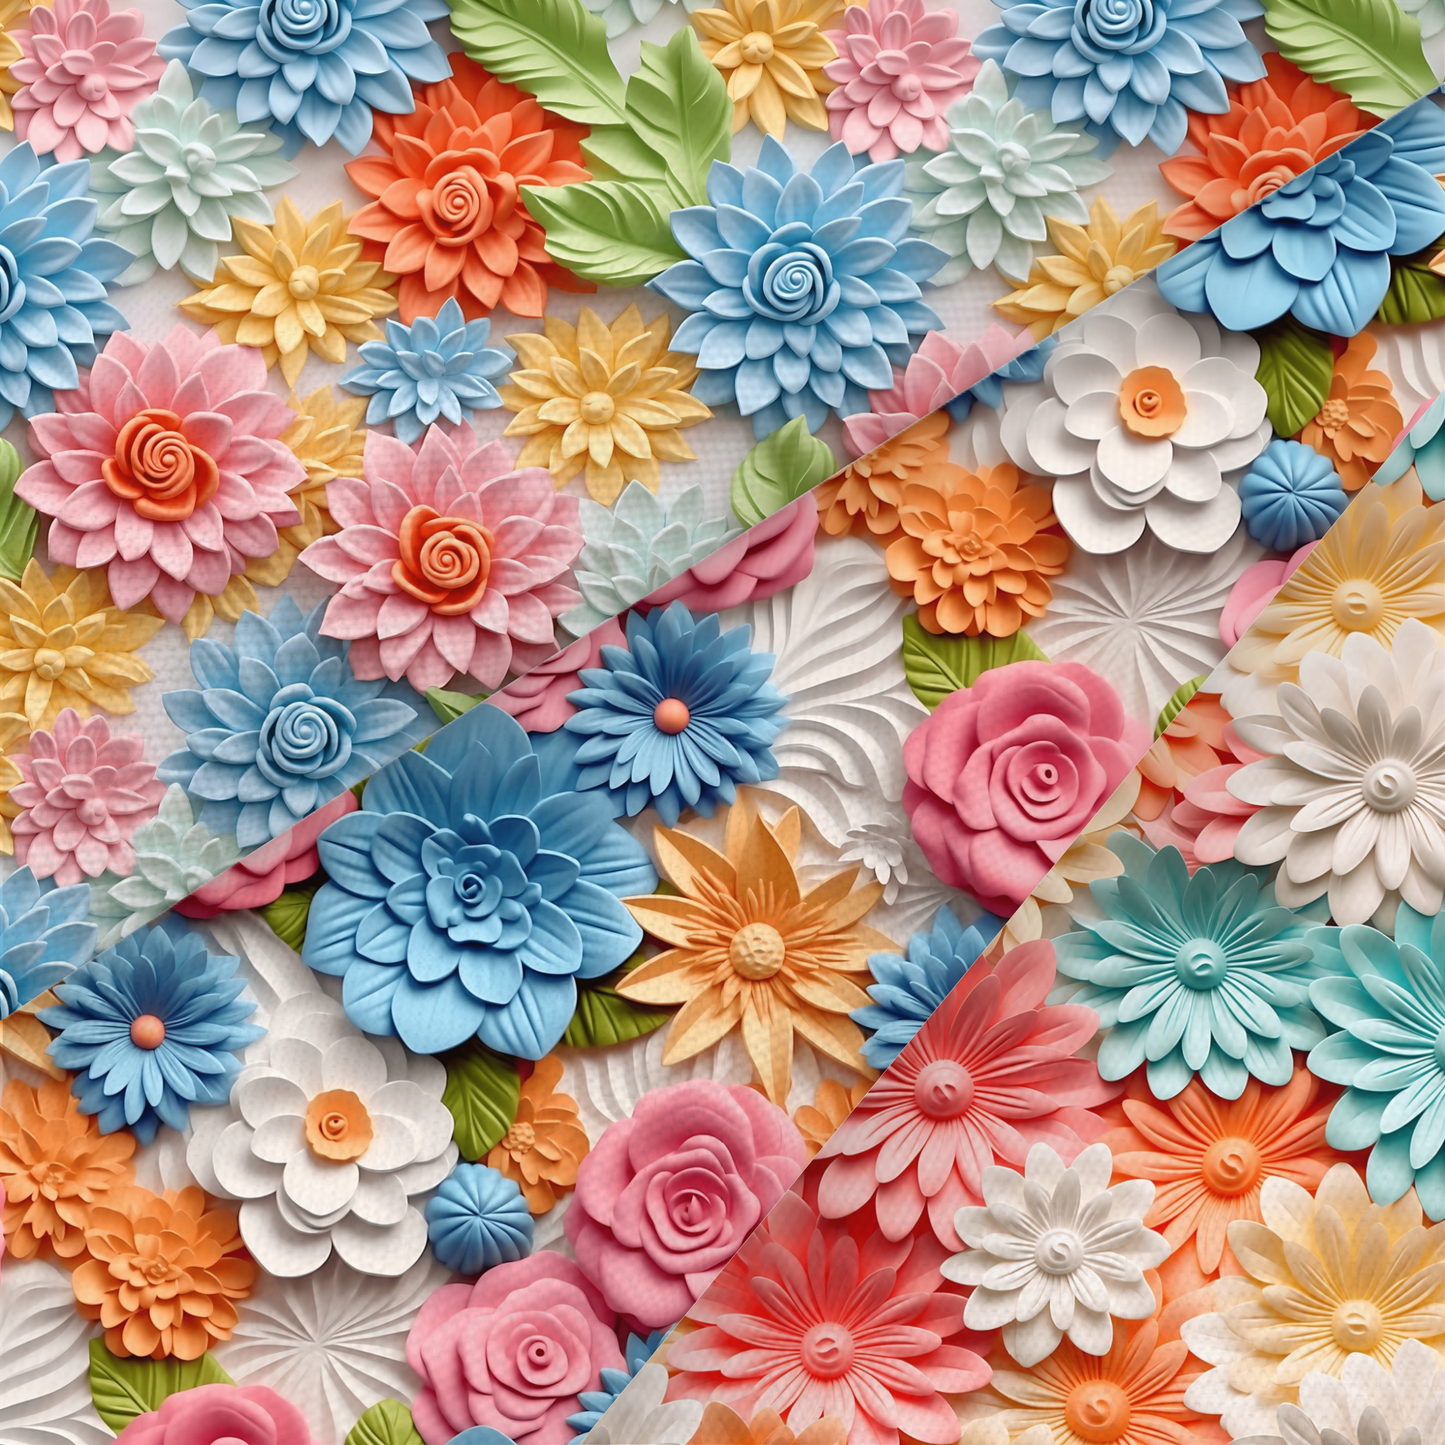 3D Effect Floral Printed Fabric